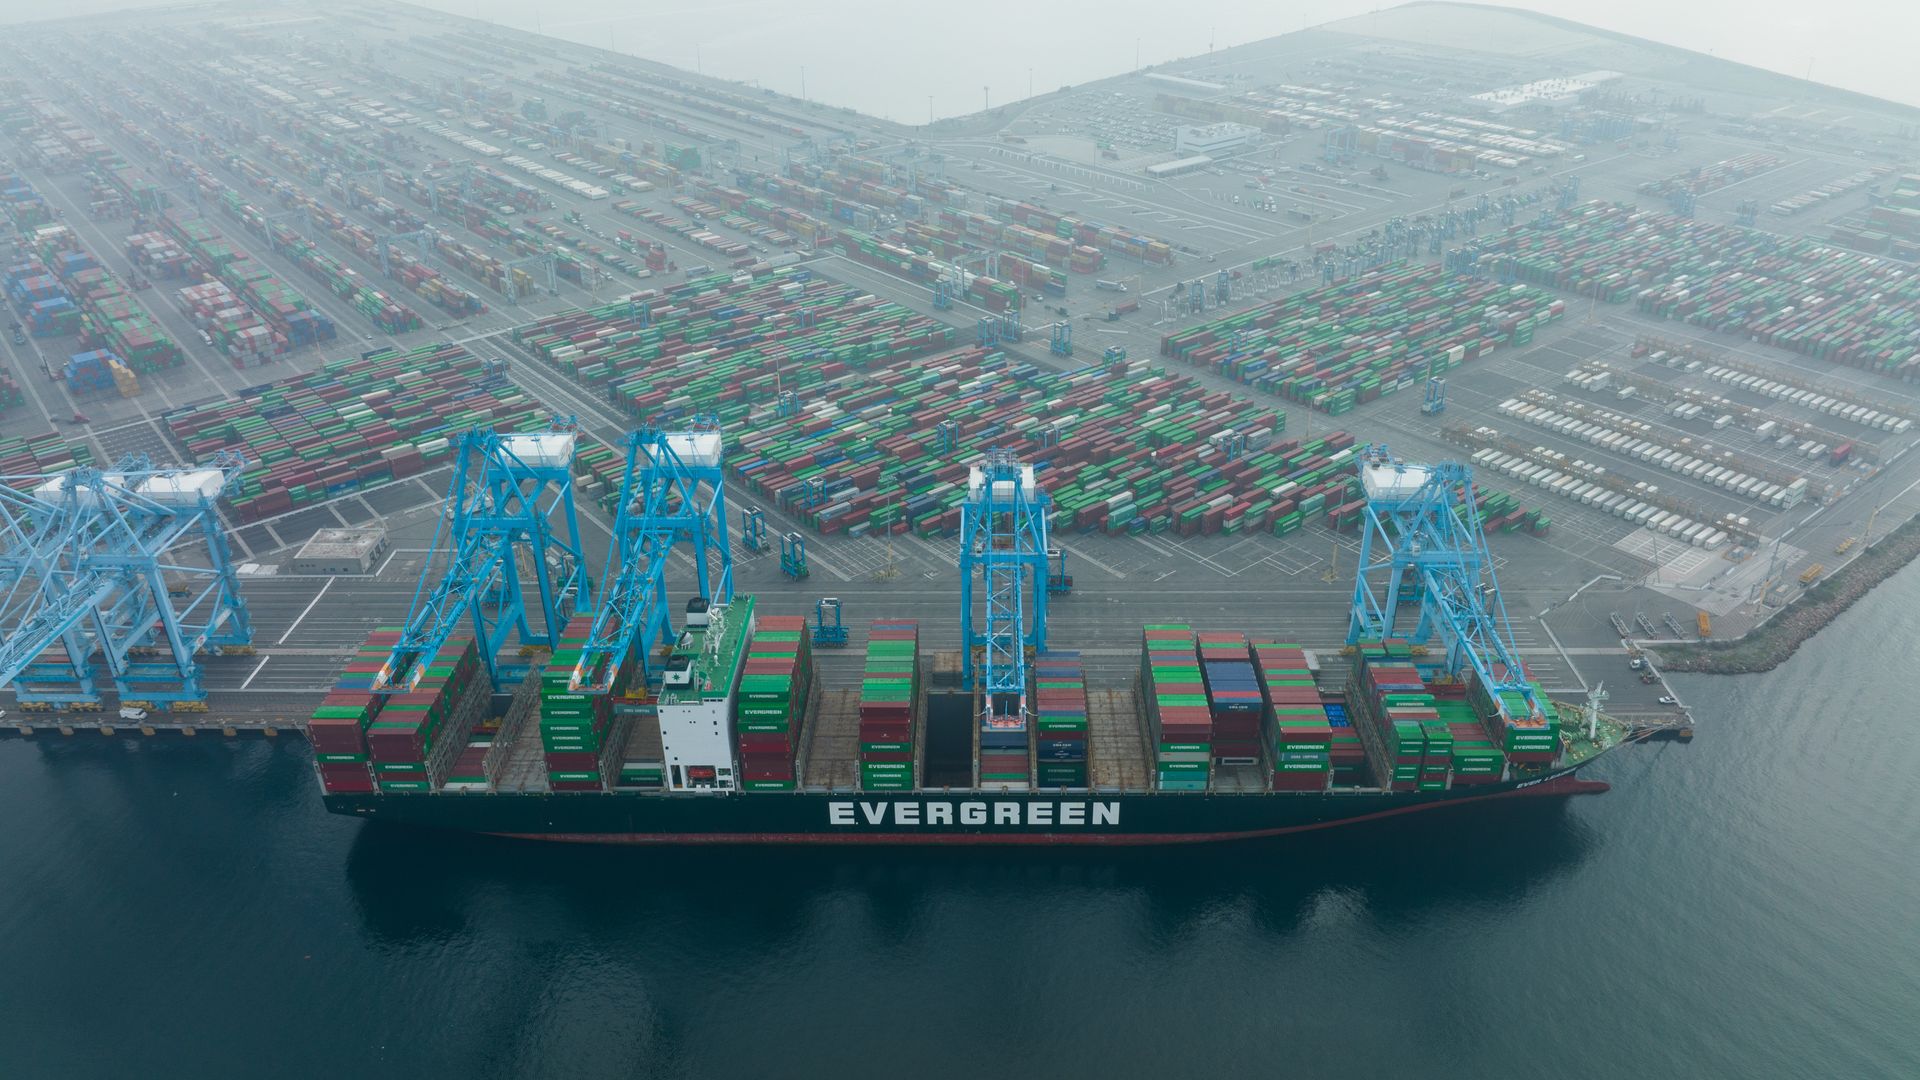 SAN PEDRO, CALIFORNIA - JANUARY 19: Aerial view of containers and cargo ships at the Port of Los Angeles on January 19, 2022 in San Pedro, California